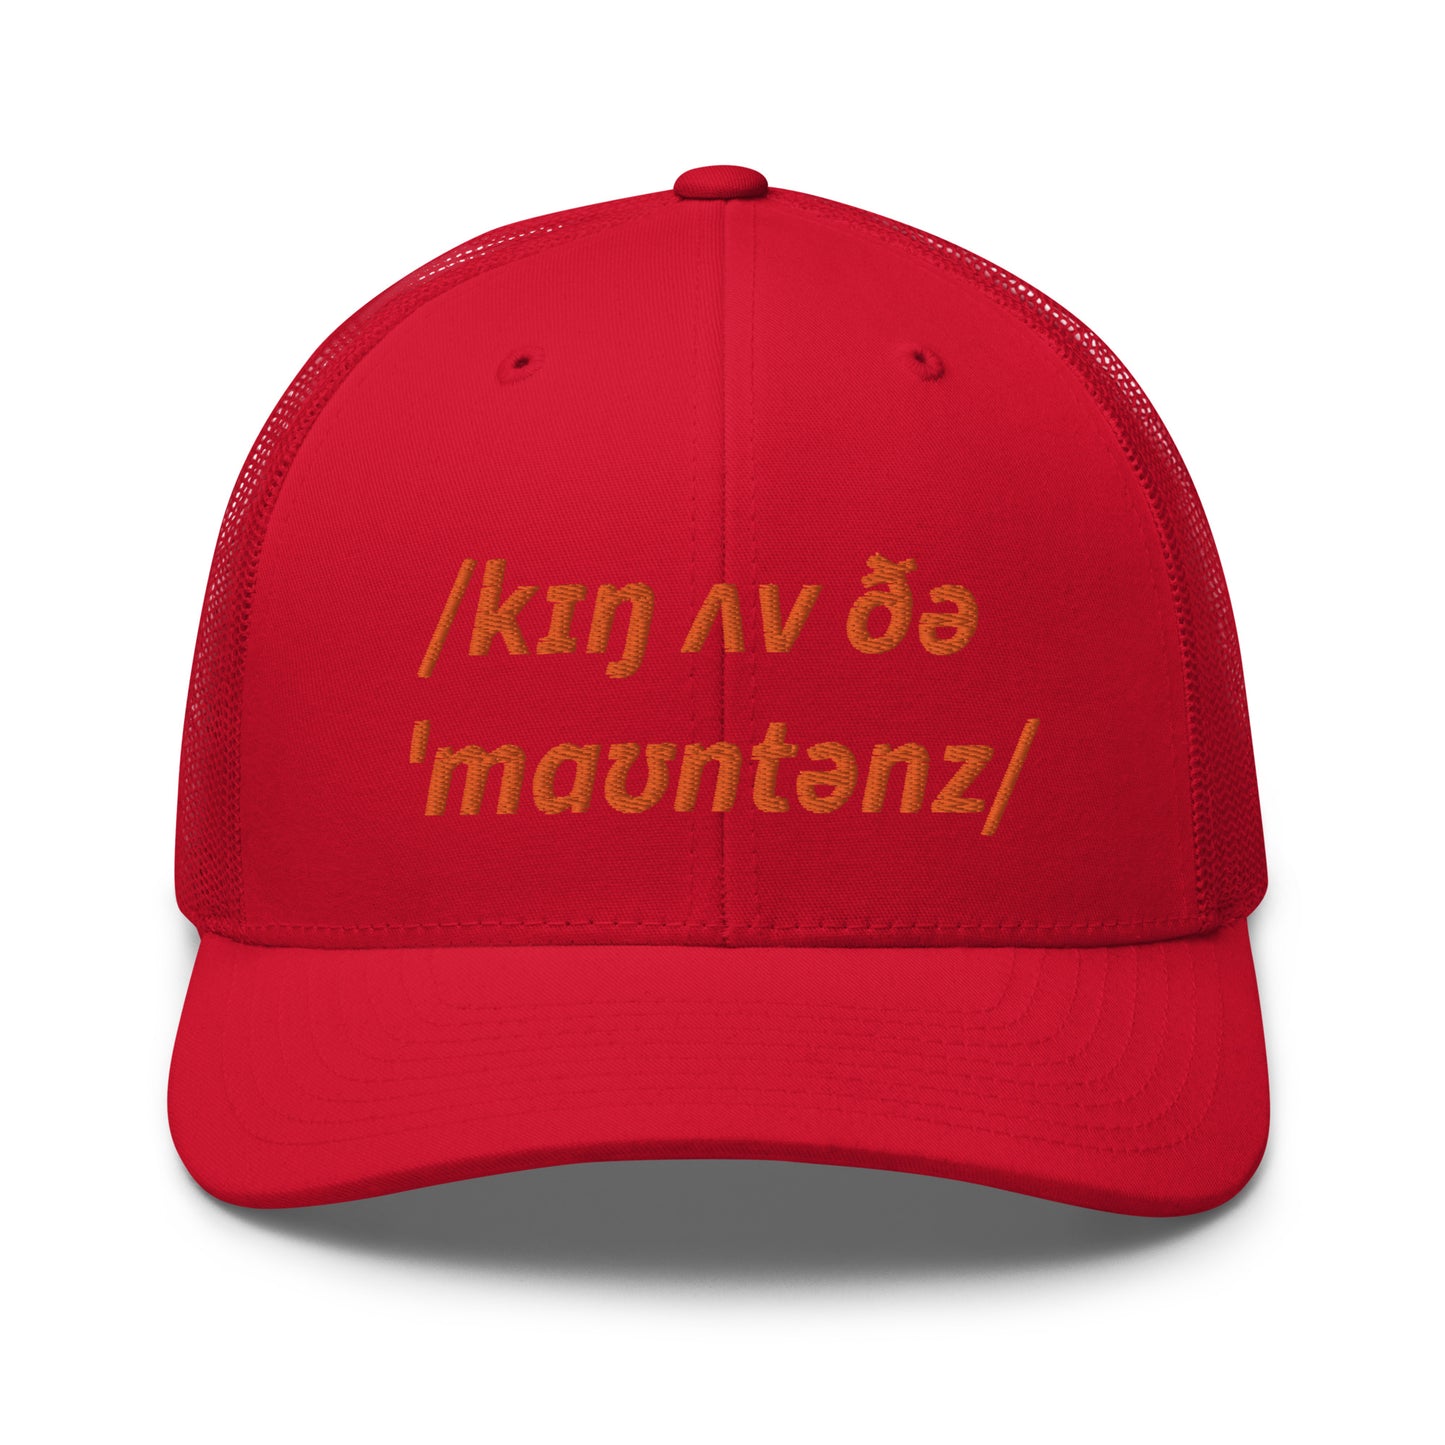 King Of The Mountains KOM Truckers Cap, Phonetic Spelling, Adult